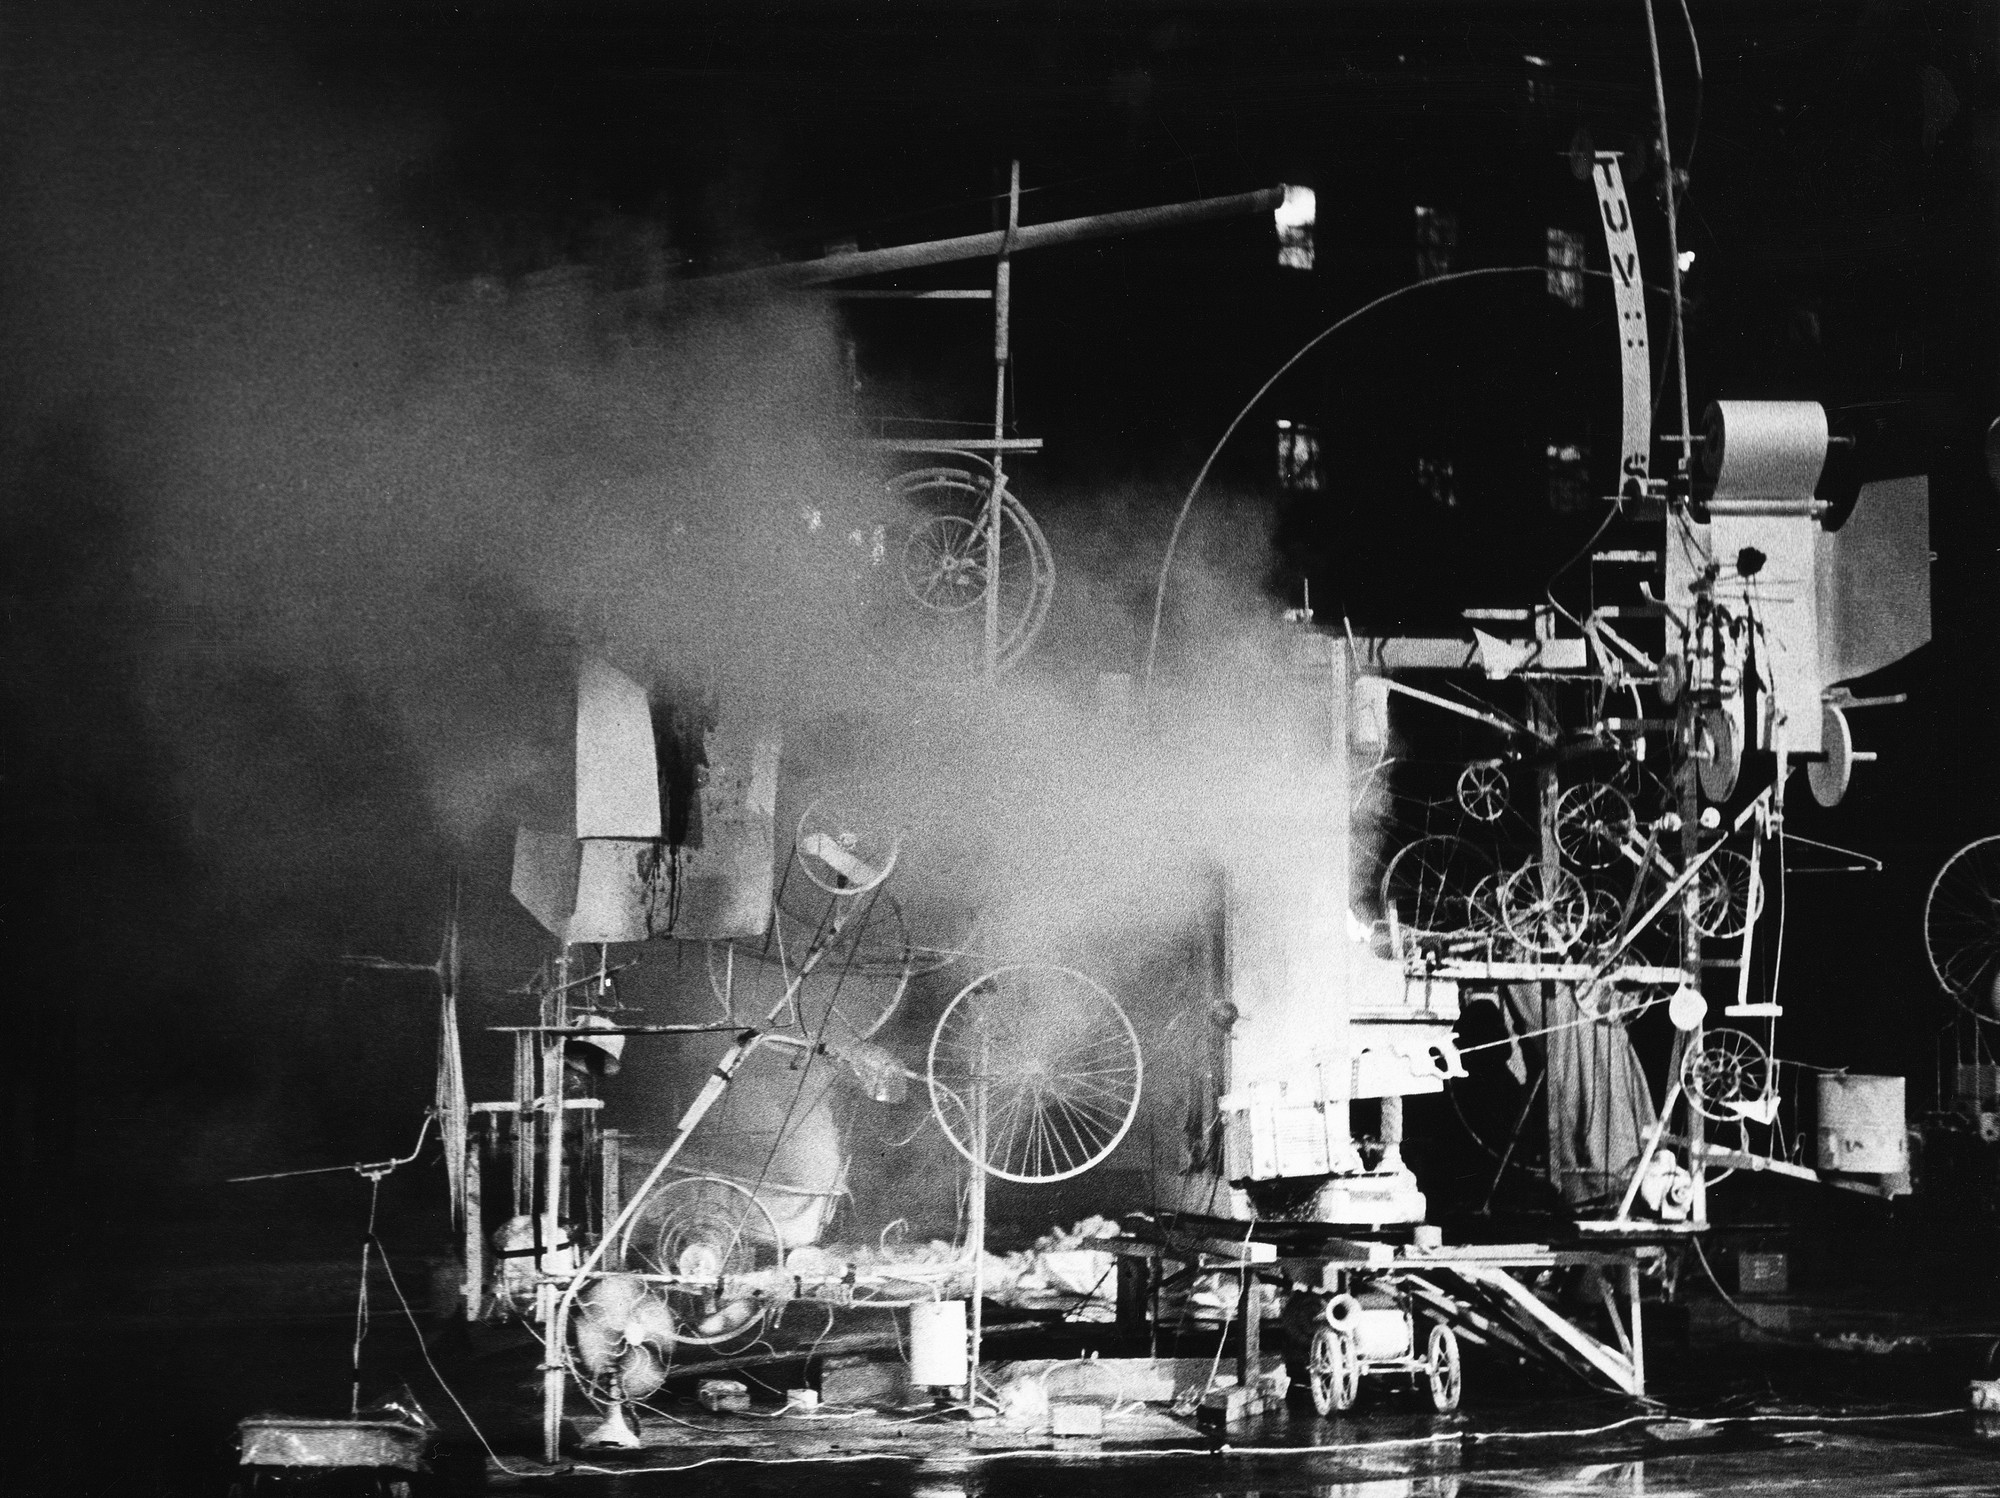 *Homage to Jean Tinguely’s Homage to New York*